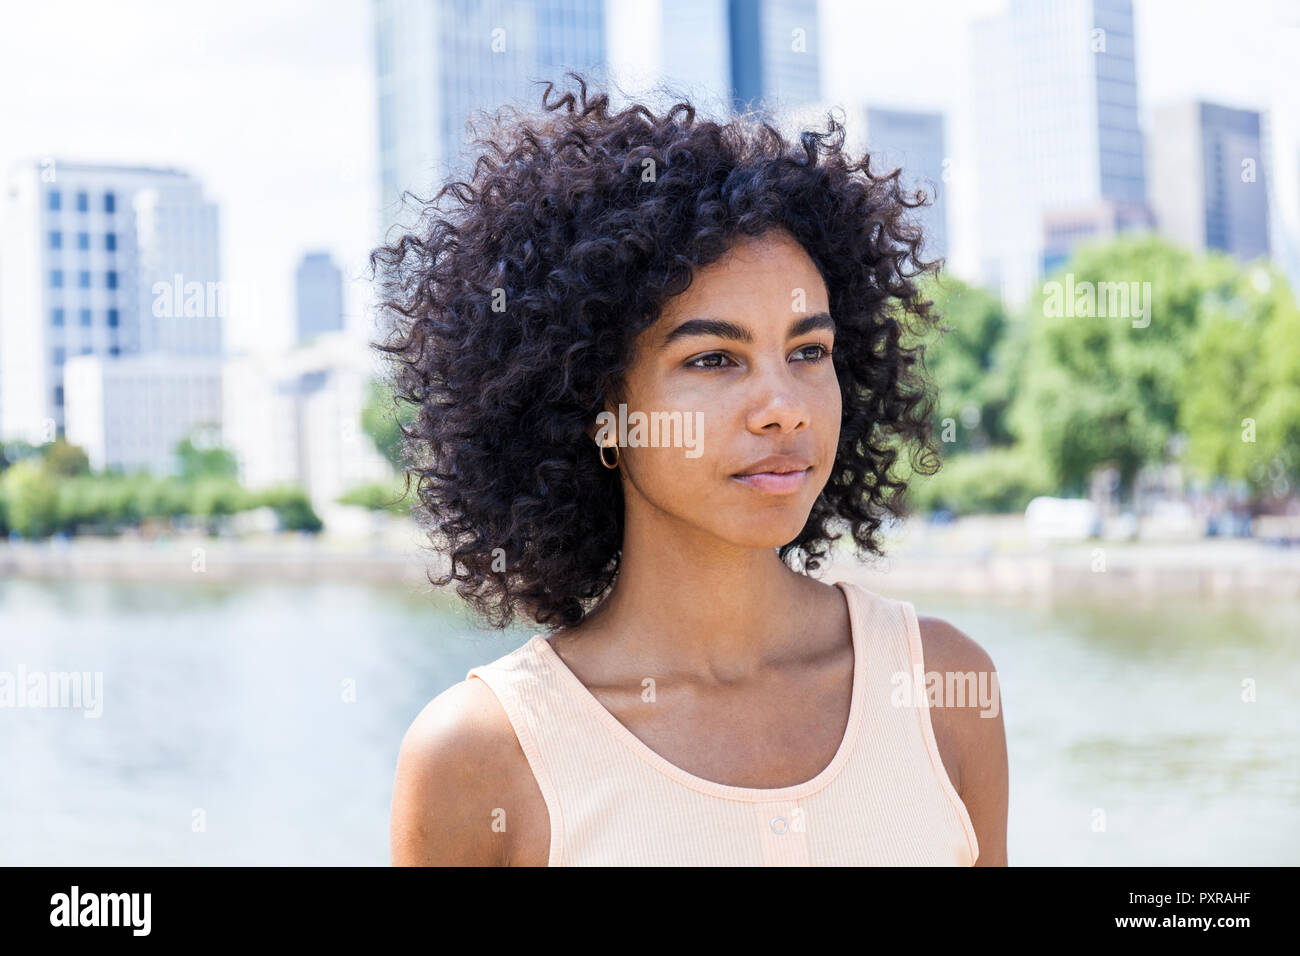 Germany, Frankfurt, portrait of young woman with curly hair in front of Main River Stock Photo